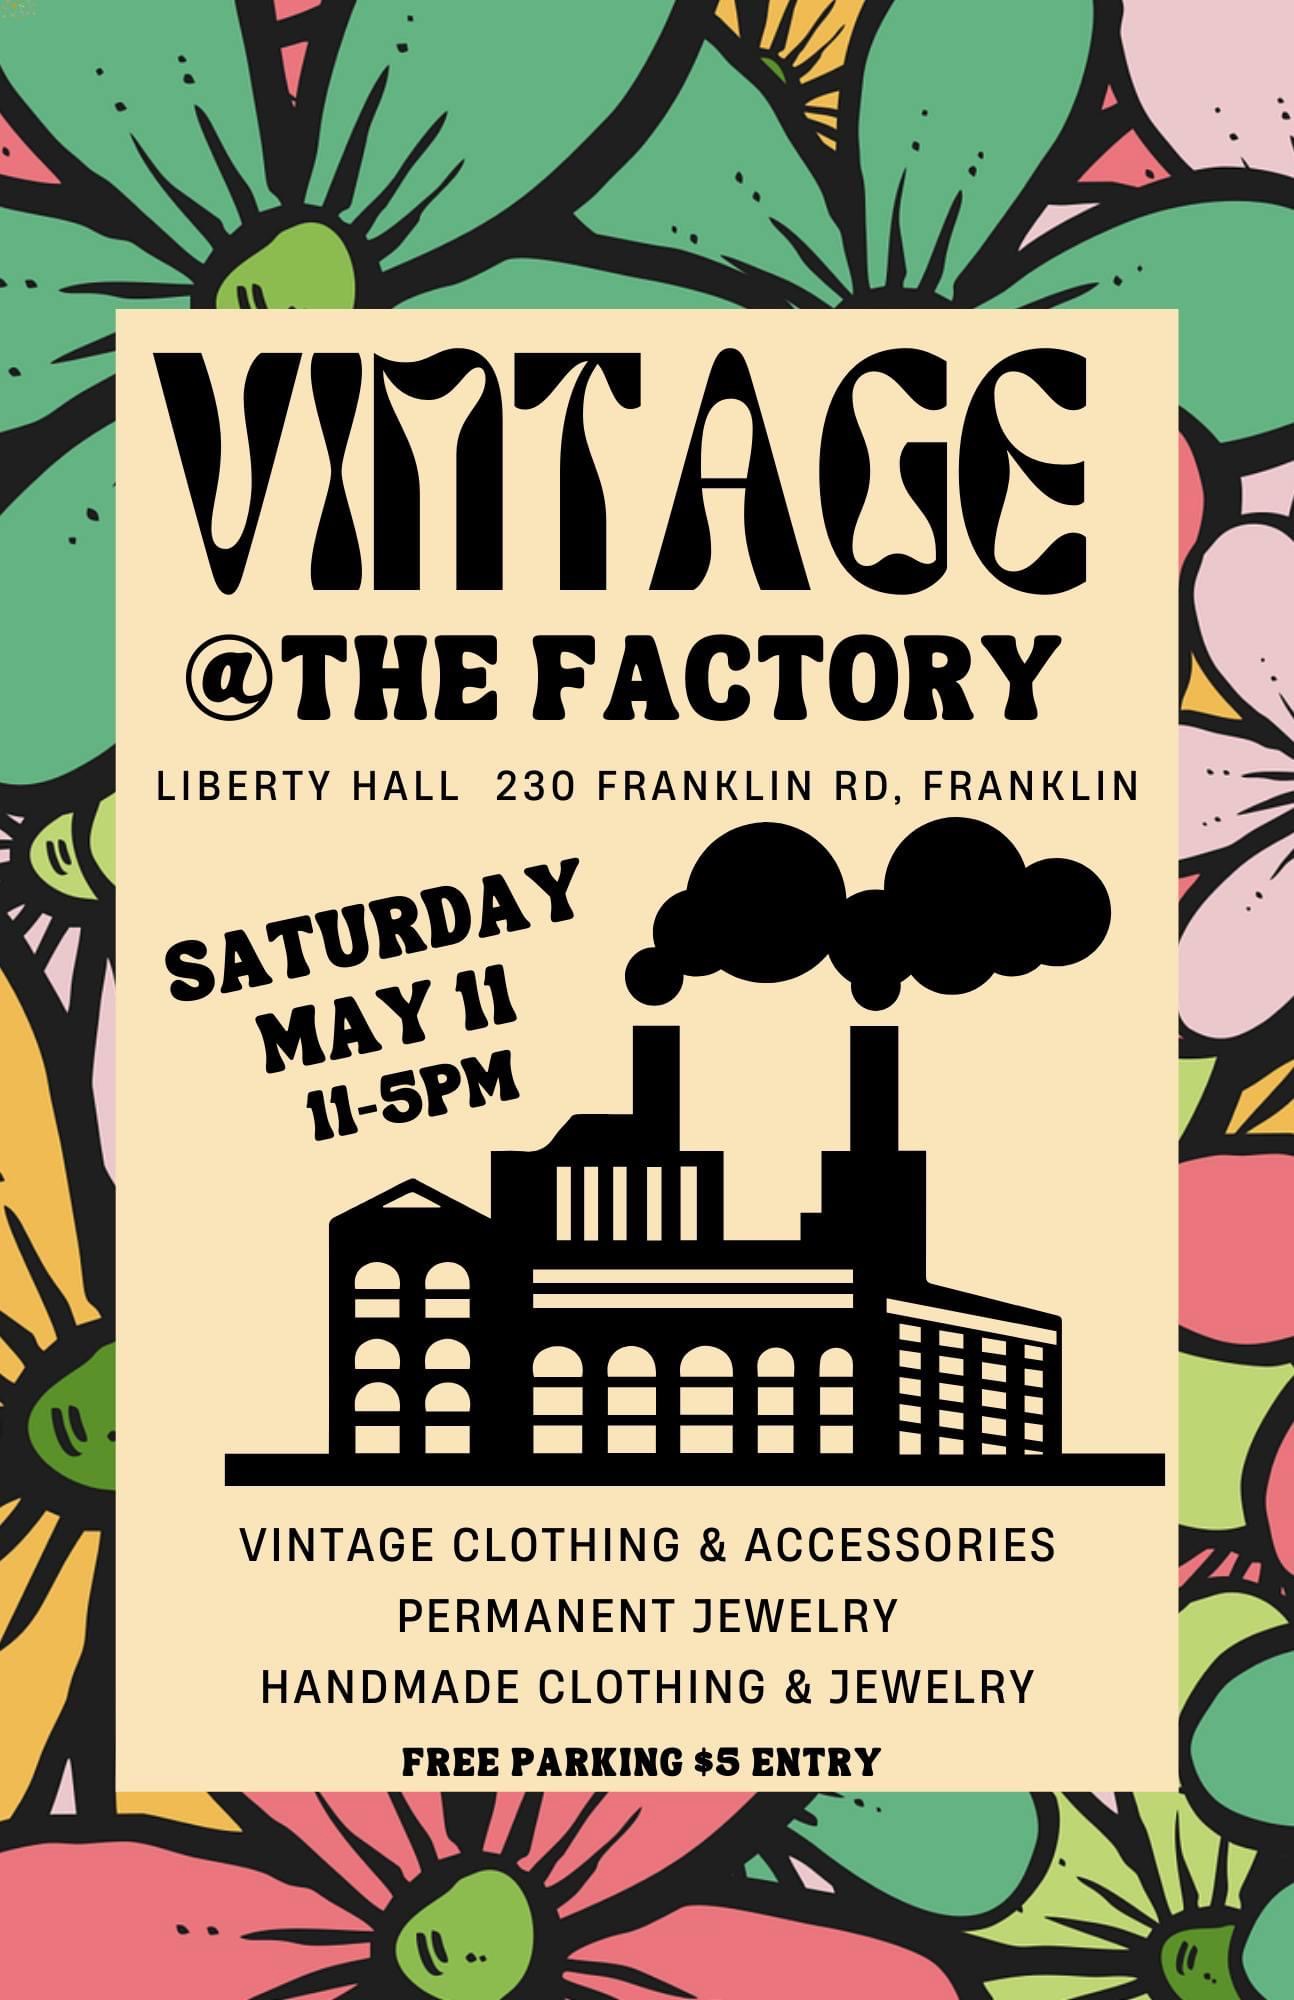 Vintage at The Factory_Shopping Event Downtown Franklin, TN, Vintage Clothing and Accessories Market.